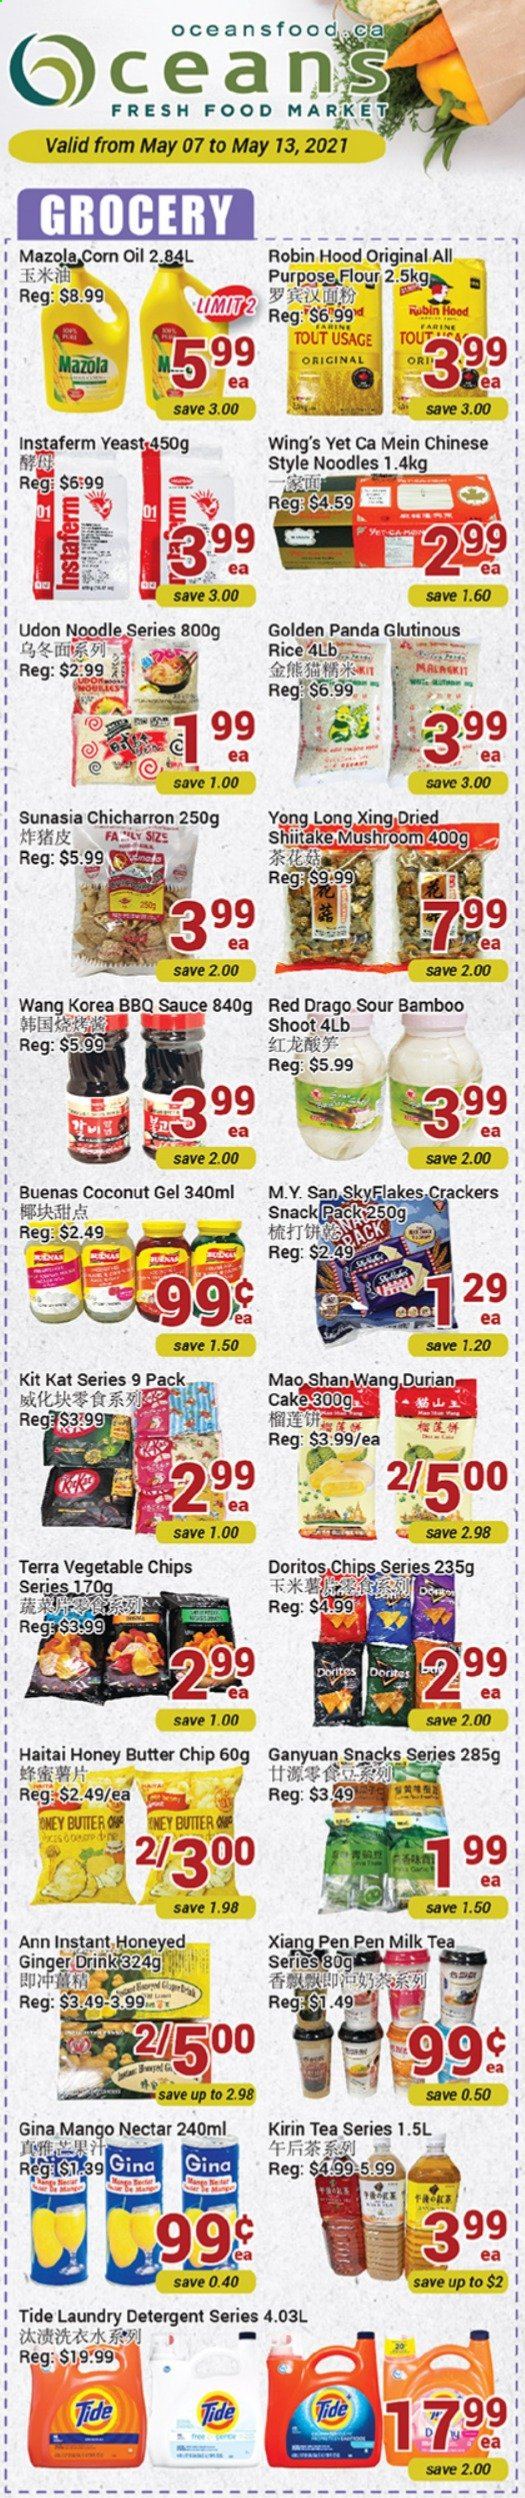 thumbnail - Oceans Flyer - May 07, 2021 - May 13, 2021 - Sales products - mushrooms, cake, ginger, mango, coconut, sauce, noodles, milk, yeast, butter, KitKat, crackers, Skyflakes, Doritos, vegetable chips, all purpose flour, flour, rice, BBQ sauce, corn oil, honey, tea, Tide, laundry detergent, chips. Page 1.